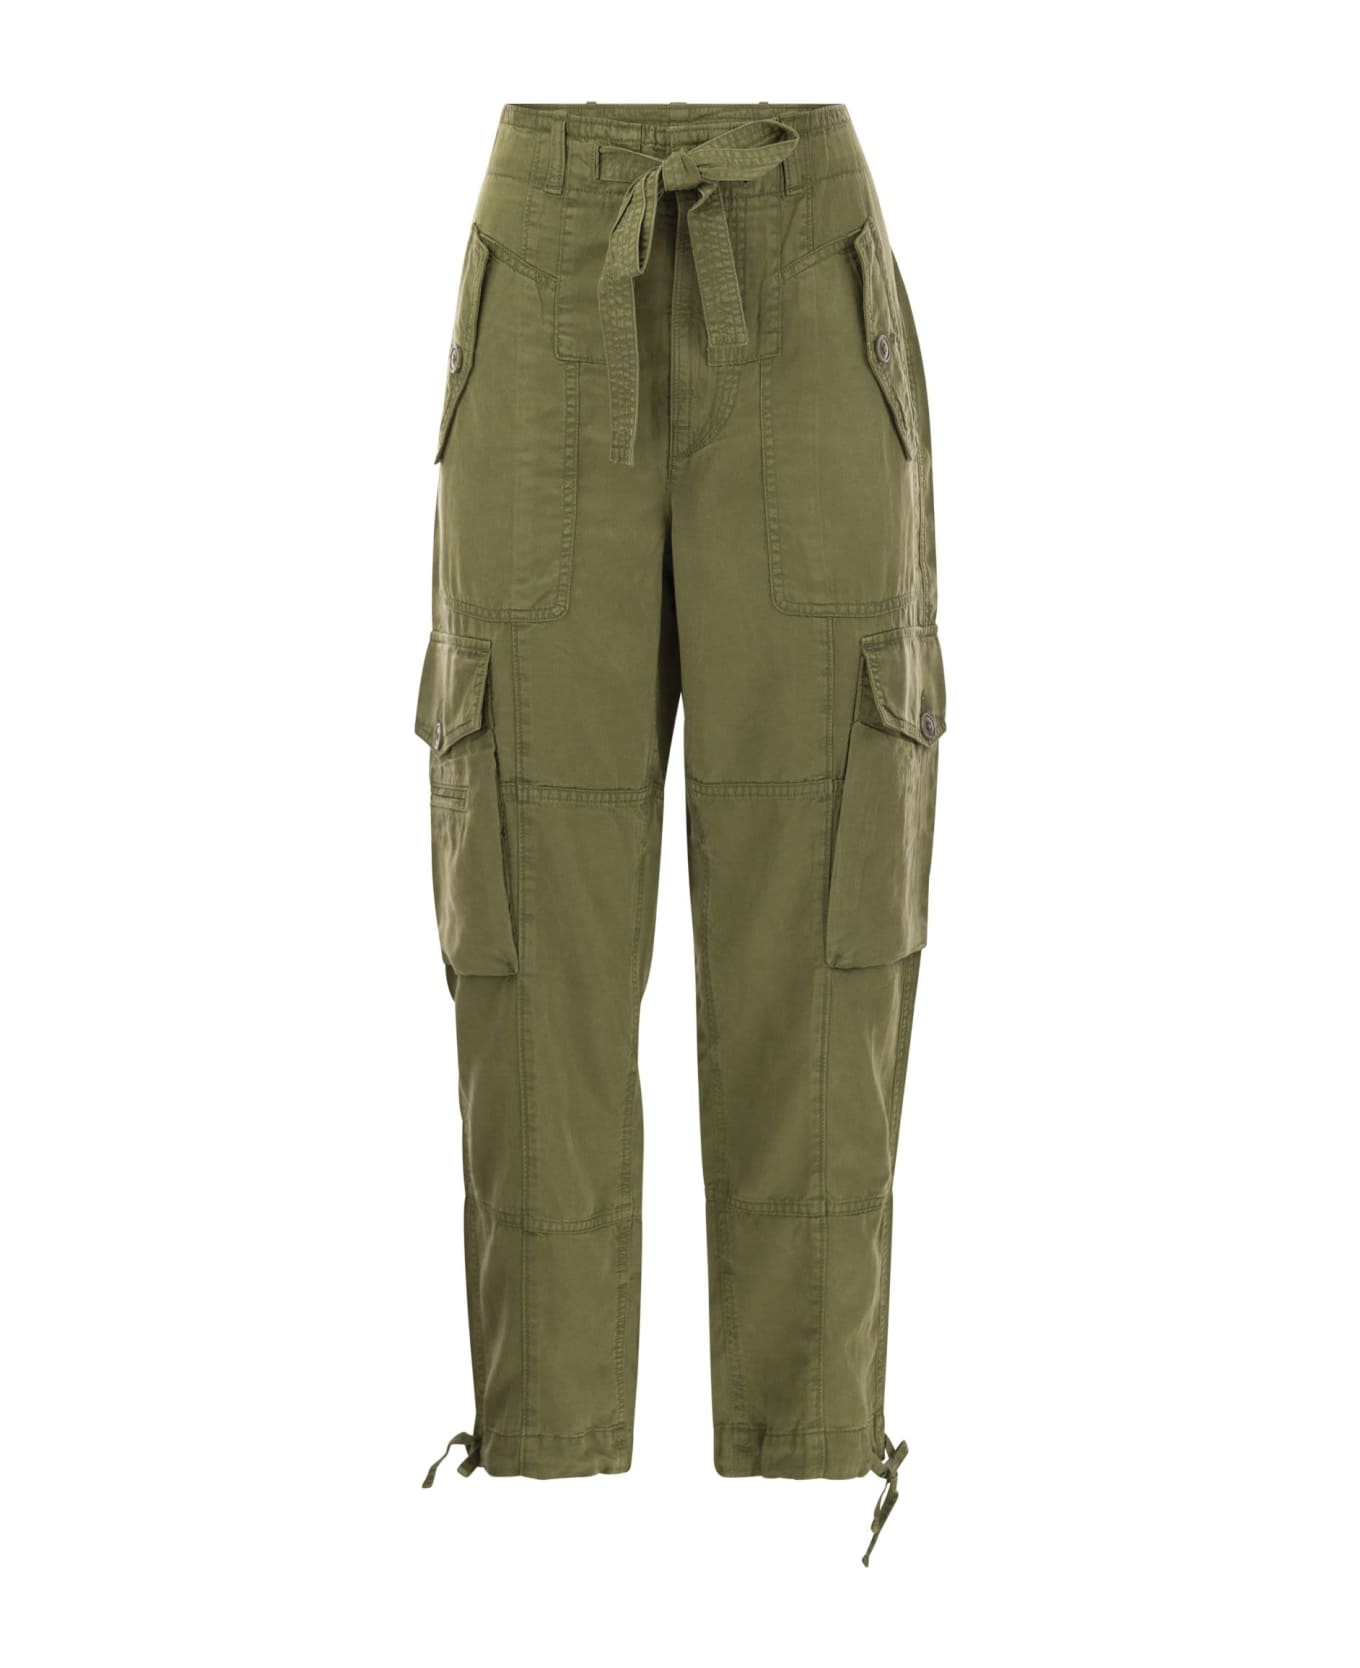 Polo Ralph Lauren Cargo Trousers - Olive Green ボトムス